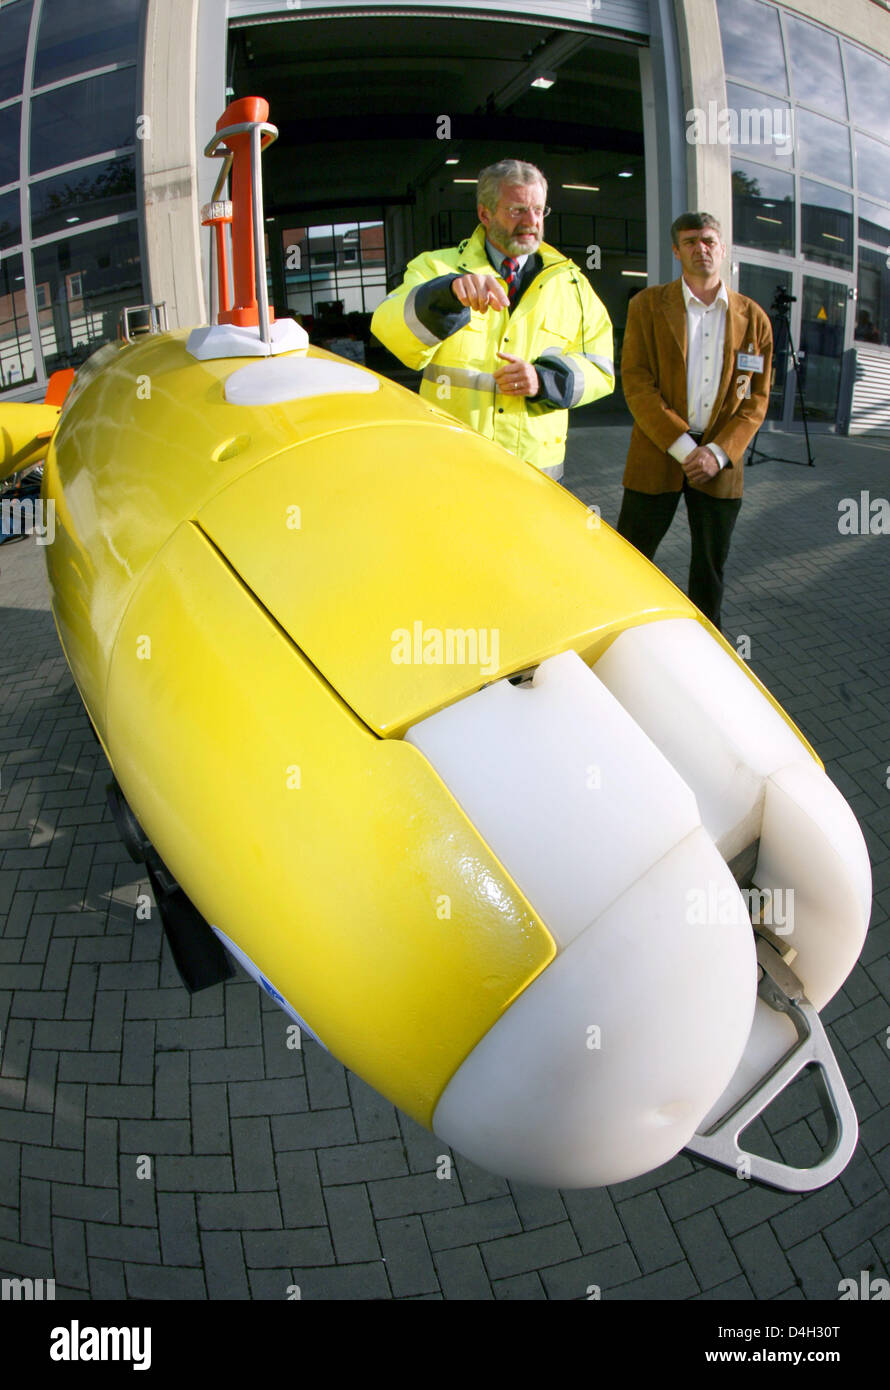 Deep submergence vehicle hi-res stock photography and images - Alamy